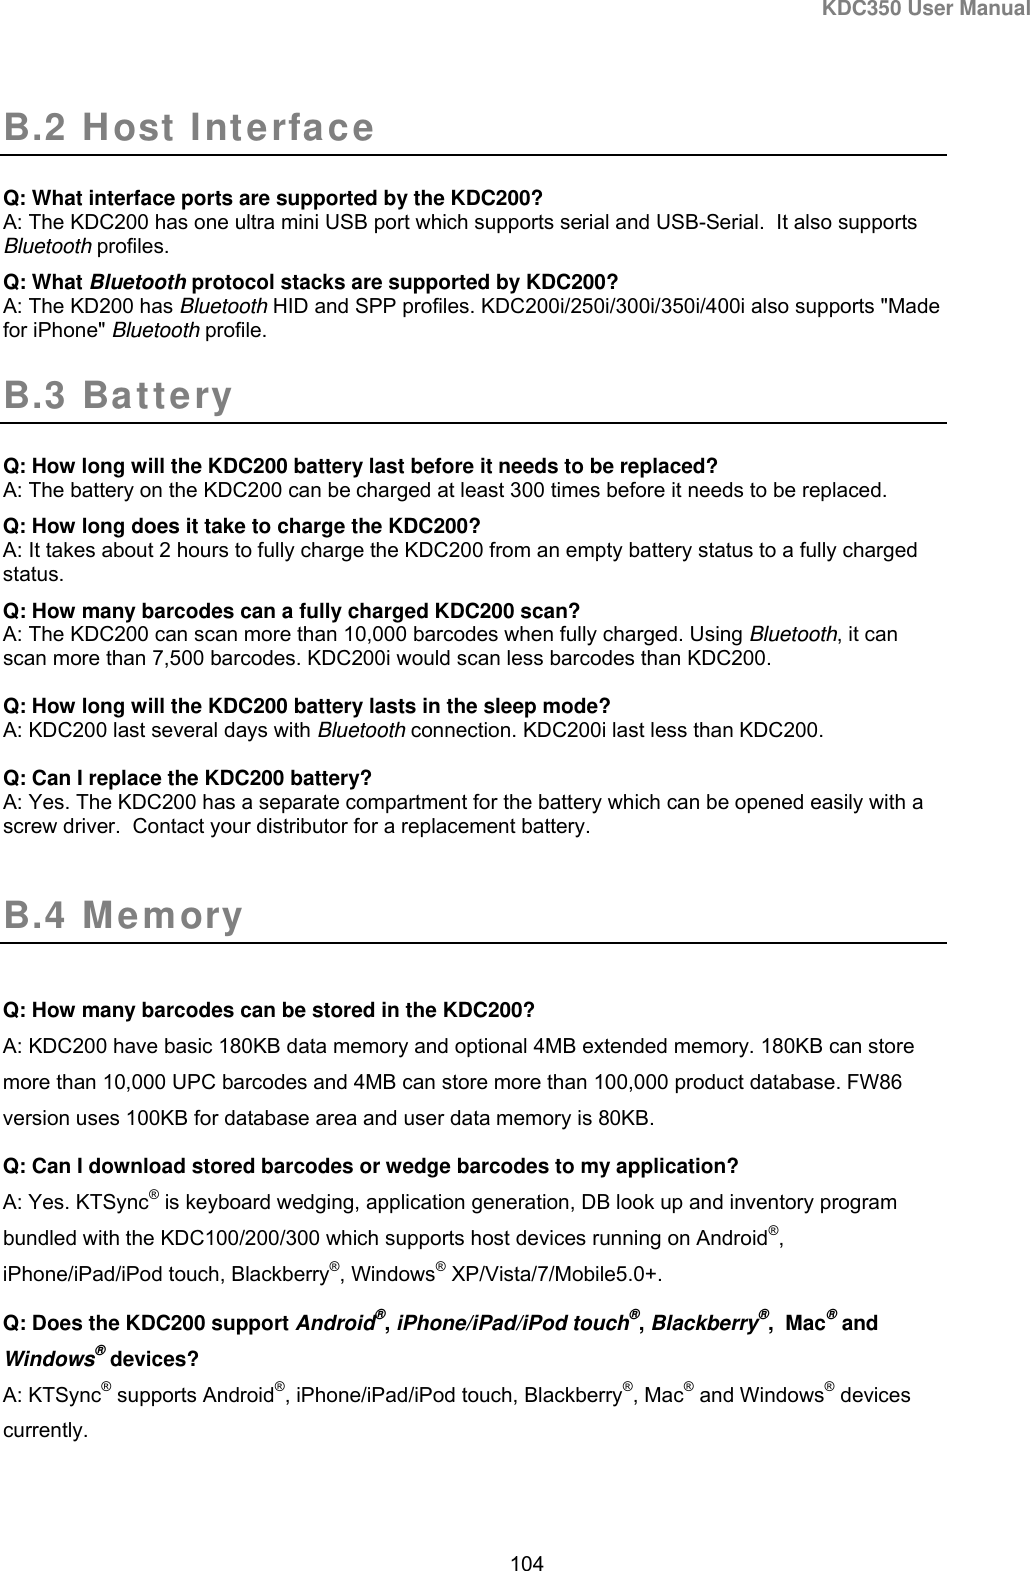 KDC350 User Manual  104  B.2 Host Interface   Q: What interface ports are supported by the KDC200? A: The KDC200 has one ultra mini USB port which supports serial and USB-Serial.  It also supports Bluetooth profiles.  Q: What Bluetooth protocol stacks are supported by KDC200? A: The KD200 has Bluetooth HID and SPP profiles. KDC200i/250i/300i/350i/400i also supports &quot;Made for iPhone&quot; Bluetooth profile. B.3 Battery  Q: How long will the KDC200 battery last before it needs to be replaced? A: The battery on the KDC200 can be charged at least 300 times before it needs to be replaced. Q: How long does it take to charge the KDC200? A: It takes about 2 hours to fully charge the KDC200 from an empty battery status to a fully charged status. Q: How many barcodes can a fully charged KDC200 scan? A: The KDC200 can scan more than 10,000 barcodes when fully charged. Using Bluetooth, it can scan more than 7,500 barcodes. KDC200i would scan less barcodes than KDC200.  Q: How long will the KDC200 battery lasts in the sleep mode? A: KDC200 last several days with Bluetooth connection. KDC200i last less than KDC200.  Q: Can I replace the KDC200 battery? A: Yes. The KDC200 has a separate compartment for the battery which can be opened easily with a screw driver.  Contact your distributor for a replacement battery.  B.4 Memory  Q: How many barcodes can be stored in the KDC200? A: KDC200 have basic 180KB data memory and optional 4MB extended memory. 180KB can store more than 10,000 UPC barcodes and 4MB can store more than 100,000 product database. FW86 version uses 100KB for database area and user data memory is 80KB. Q: Can I download stored barcodes or wedge barcodes to my application? A: Yes. KTSync® is keyboard wedging, application generation, DB look up and inventory program bundled with the KDC100/200/300 which supports host devices running on Android®, iPhone/iPad/iPod touch, Blackberry®, Windows® XP/Vista/7/Mobile5.0+. Q: Does the KDC200 support Android®, iPhone/iPad/iPod touch®, Blackberry®,  Mac® and Windows® devices? A: KTSync® supports Android®, iPhone/iPad/iPod touch, Blackberry®, Mac® and Windows® devices currently. 